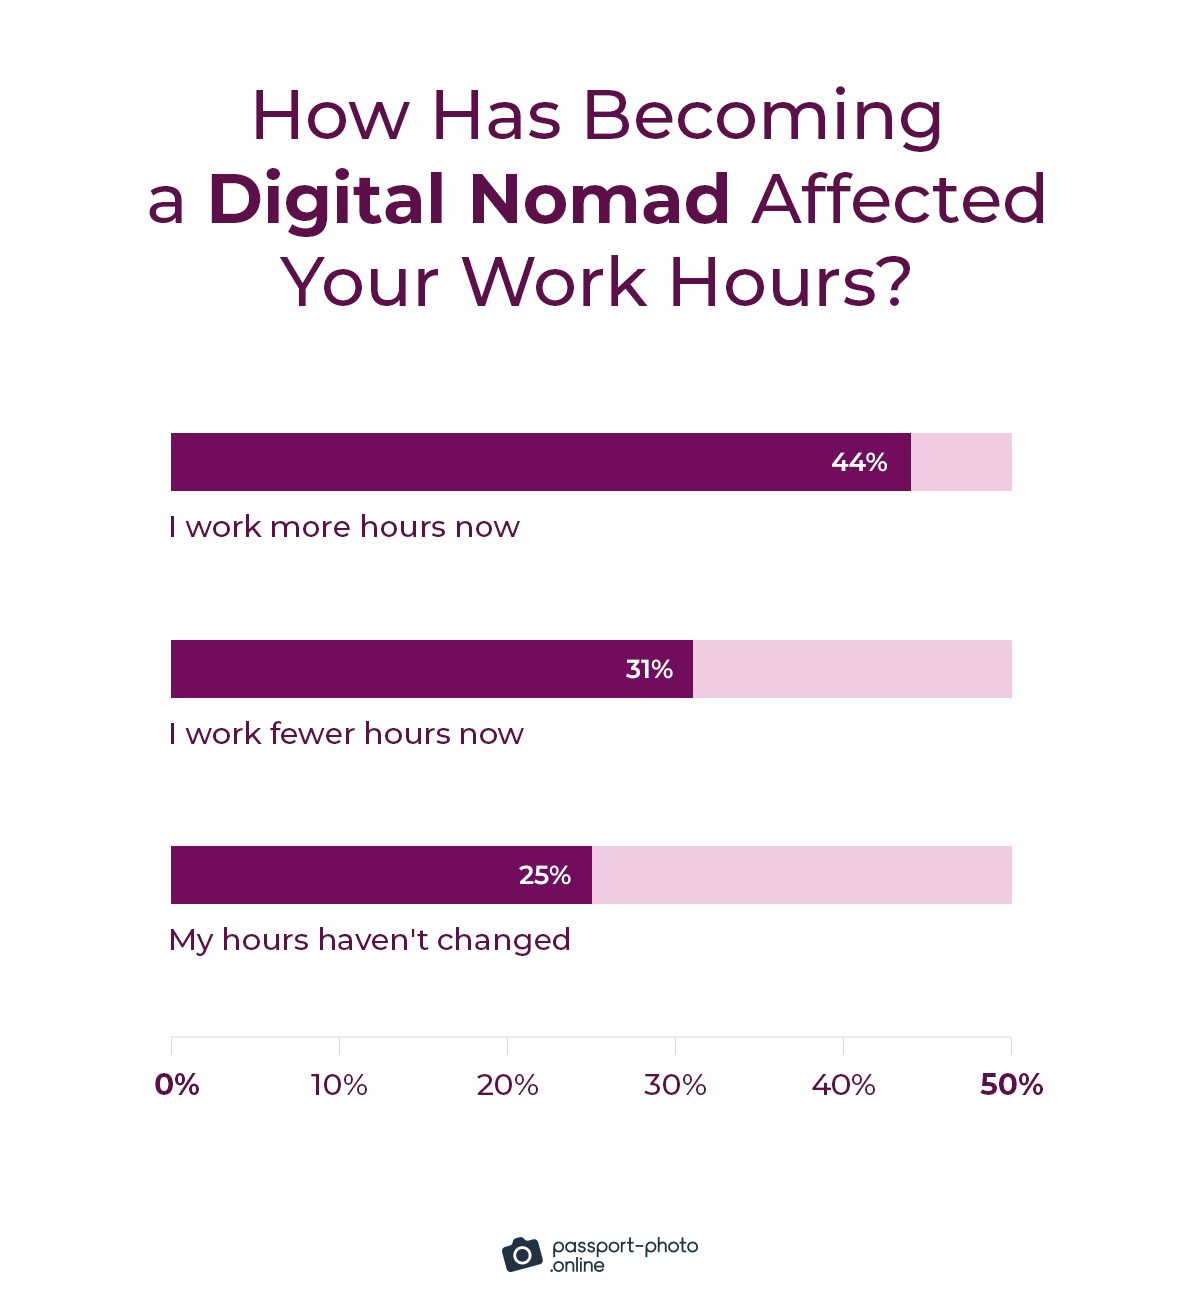 most working professionals (44%) started to put in more hours after becoming digital nomads